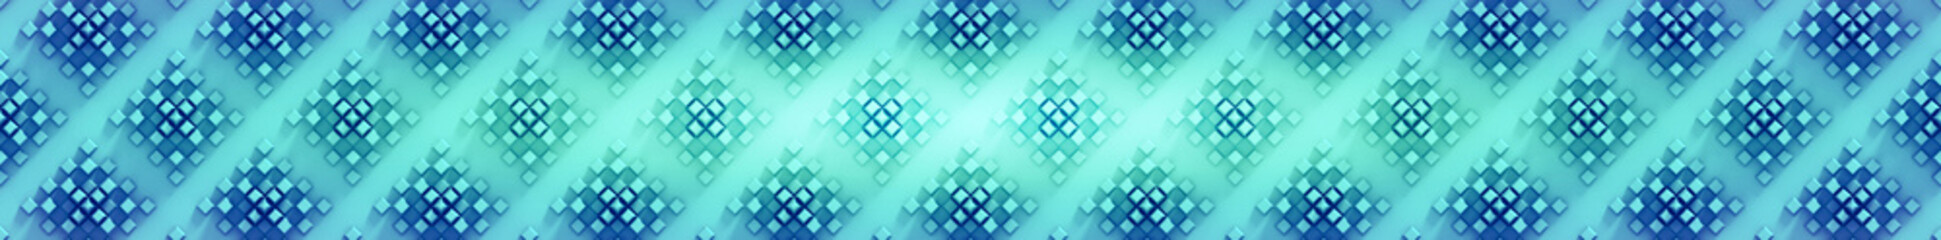 blue banner background made of an array of  cubes and rectangles 